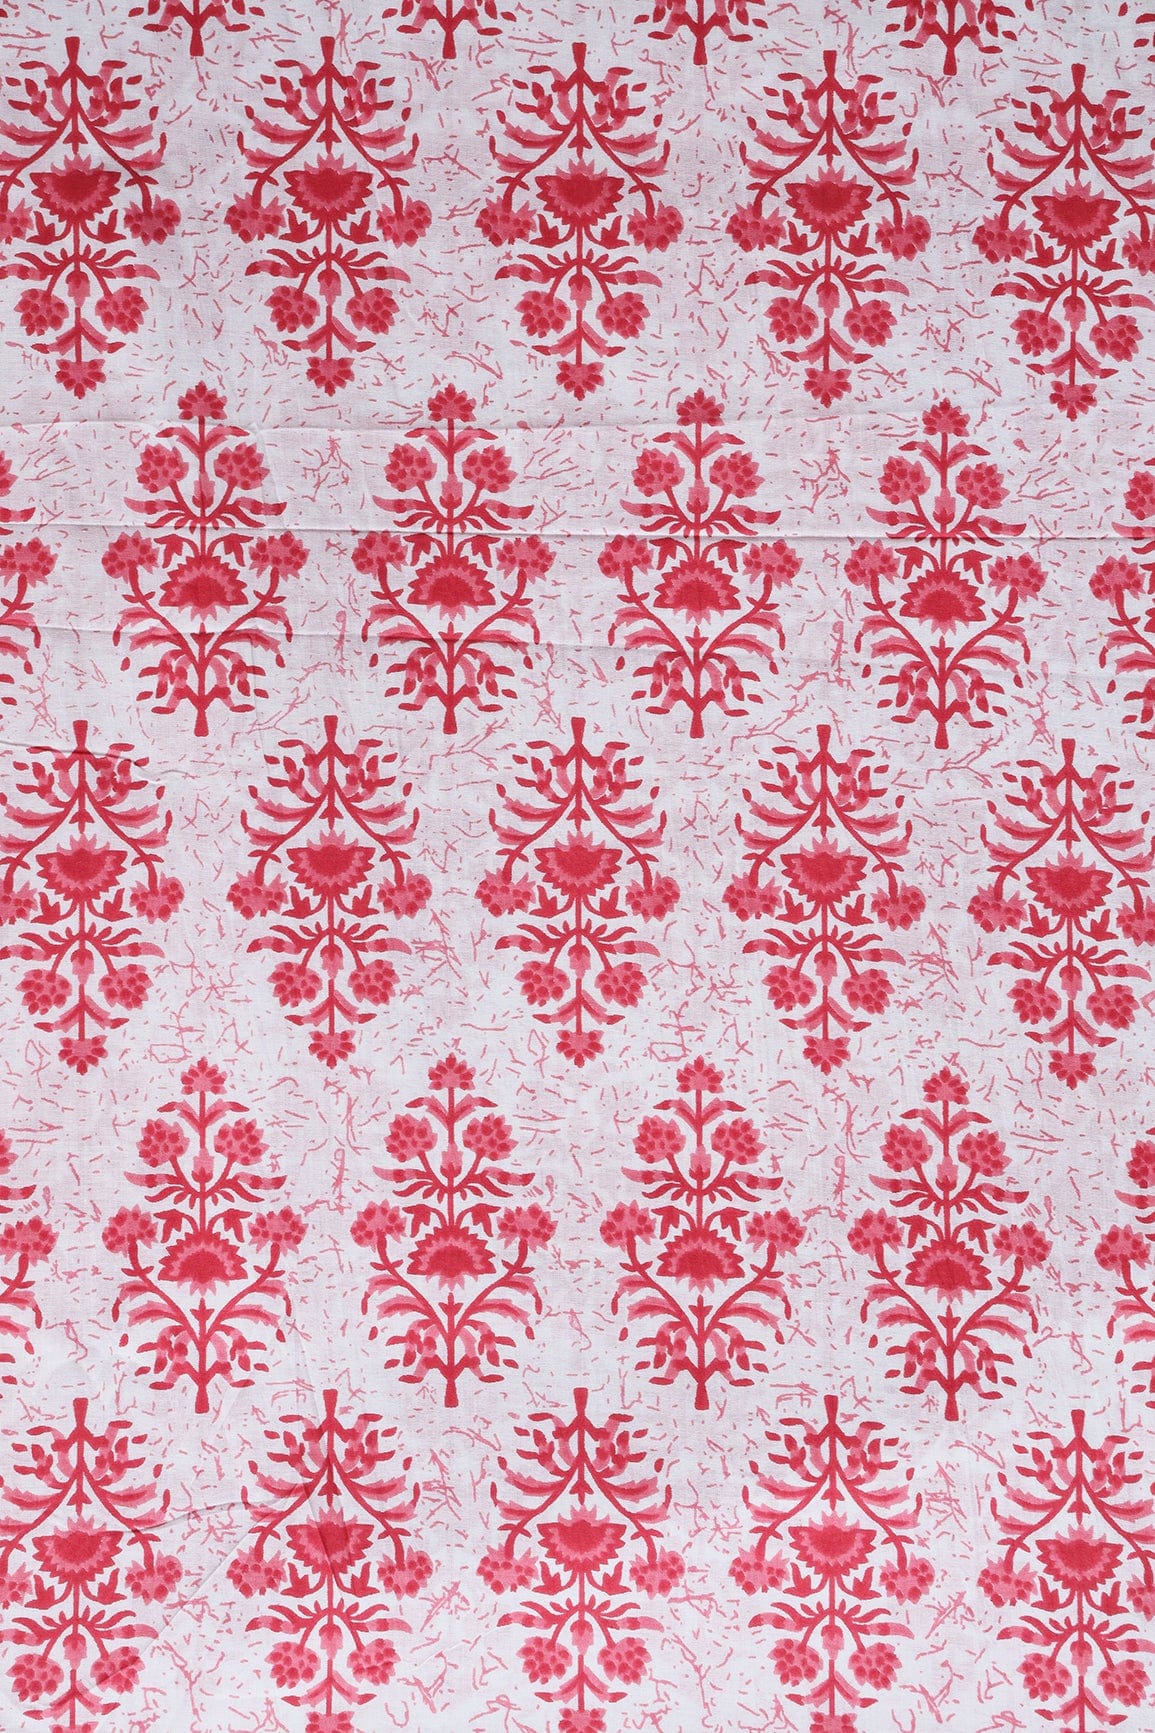 doeraa Prints White And Pink Floral Print On Pure Mul Cotton Fabric